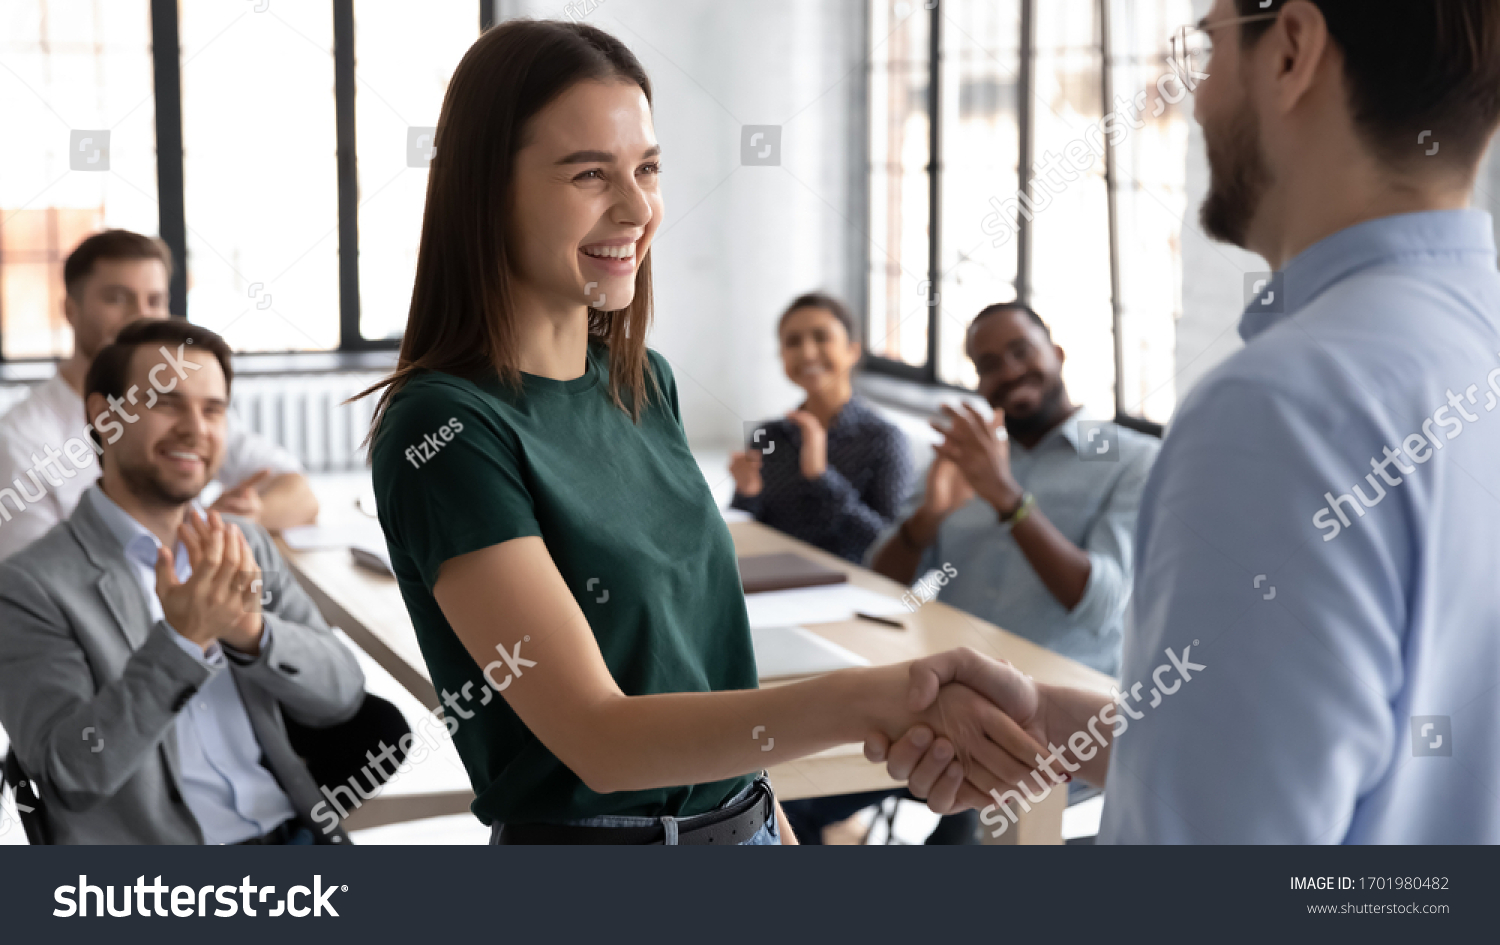 Businessman shake hand of excited Caucasian female employee greeting with achievement or success at office meeting, male boss or CEO handshake happy woman worker congratulate with work promotion #1701980482